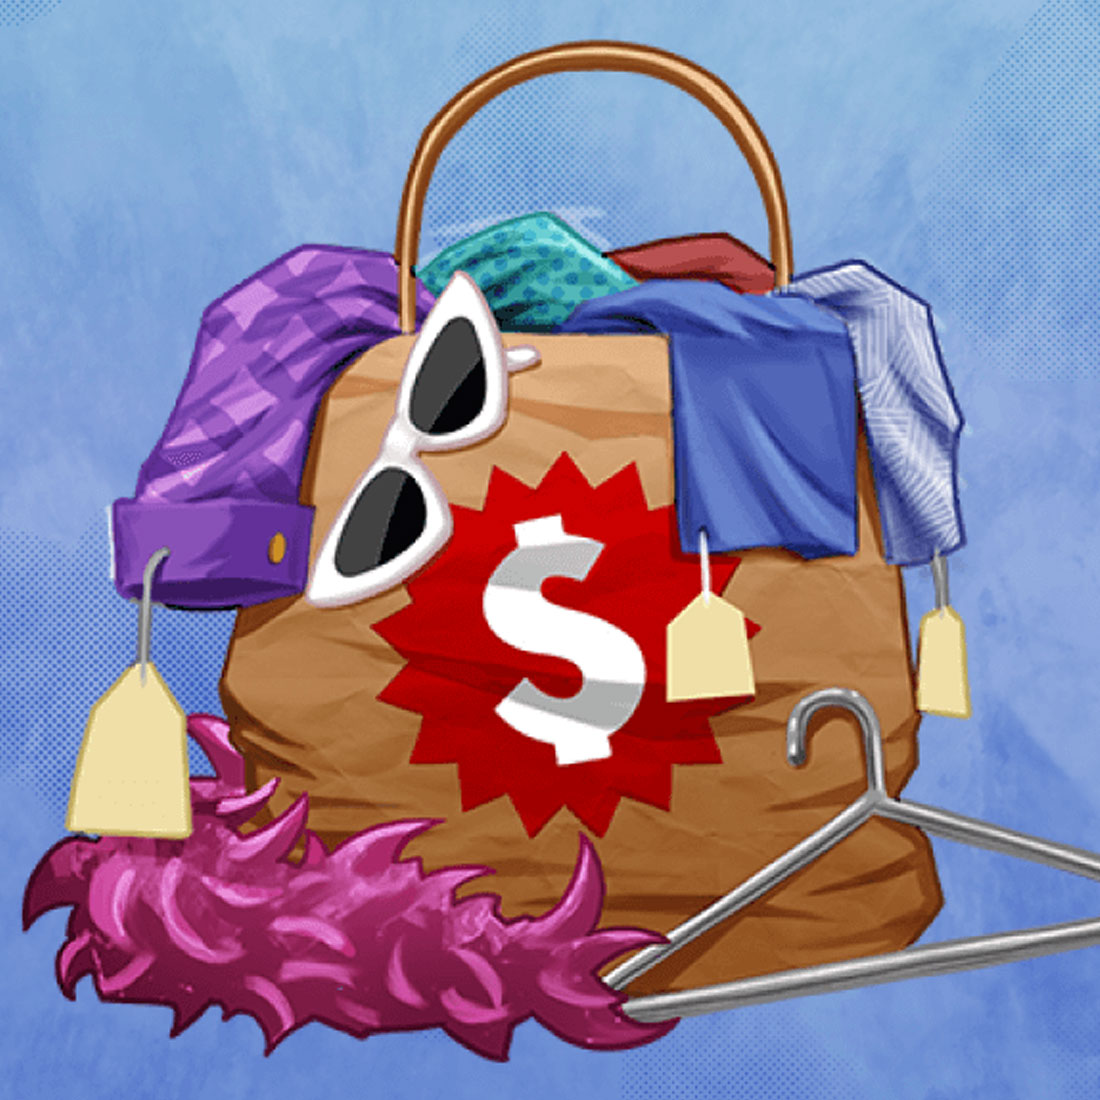 An illustration of various vintage objects and clothing in a bag